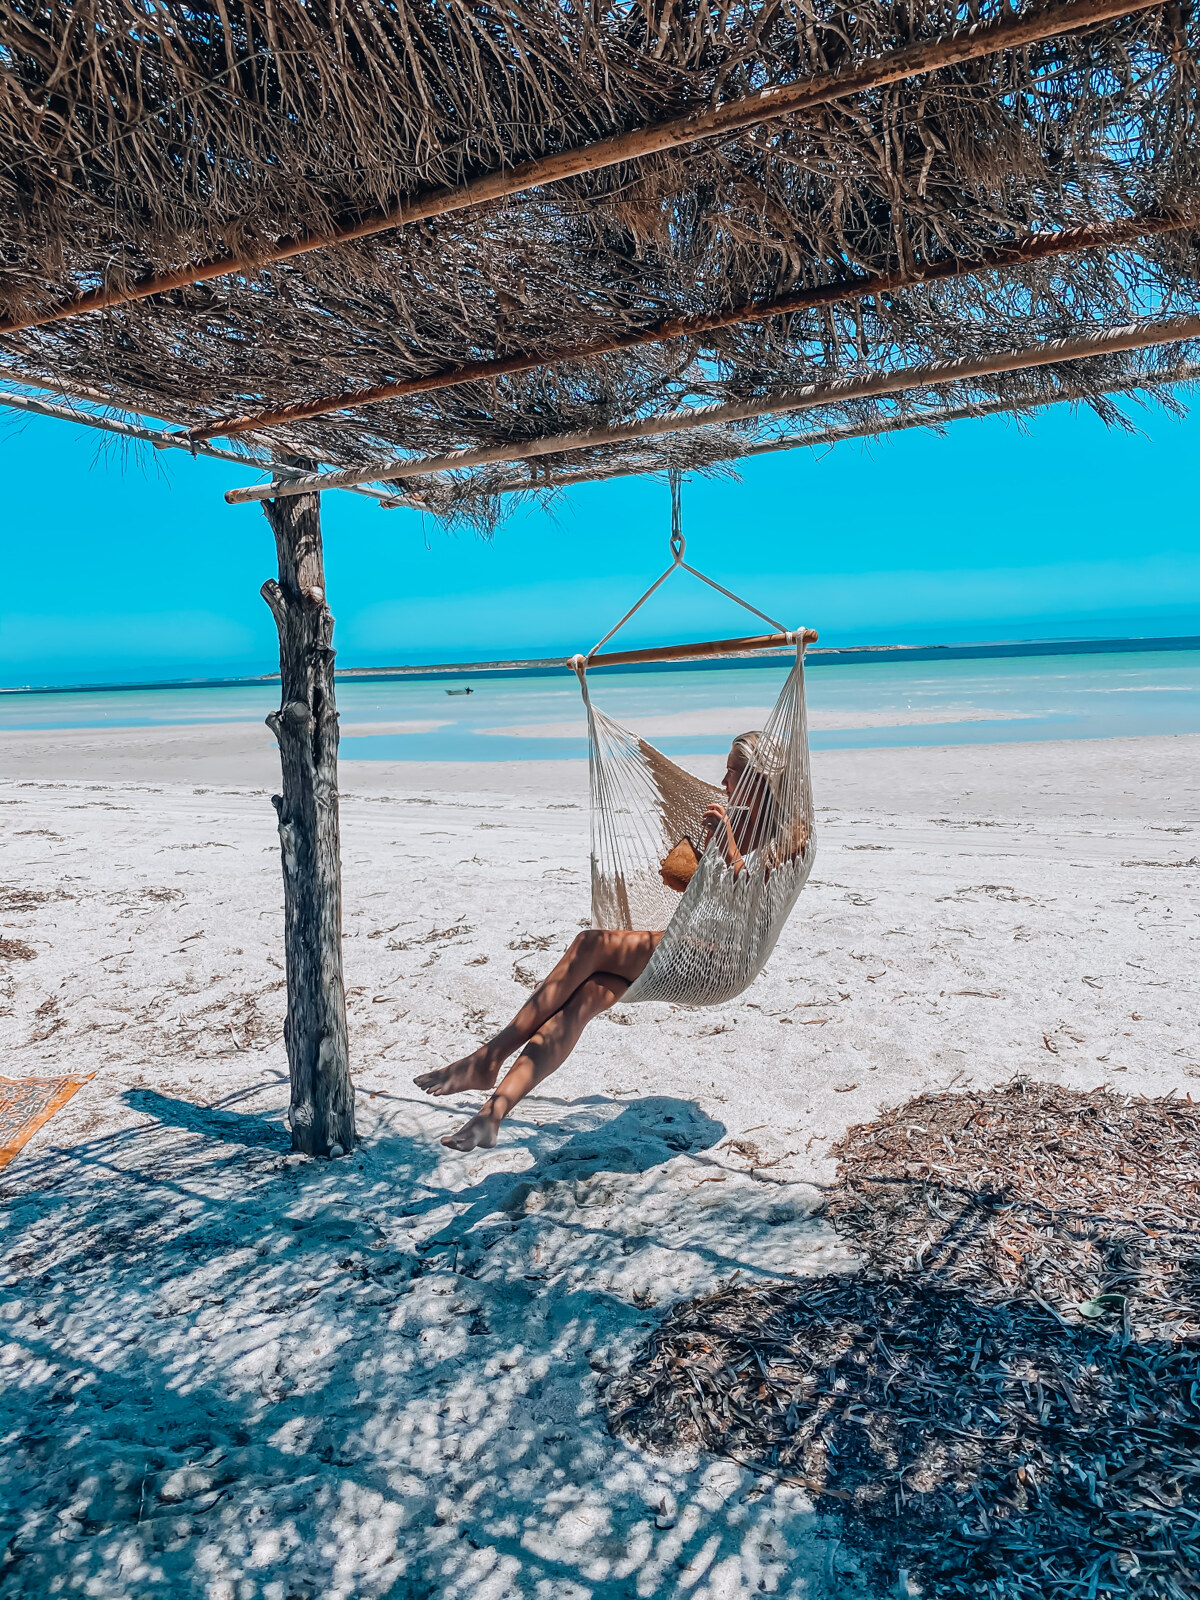 A woman relaxes in a chair hammock on a beach in Streaky Bay